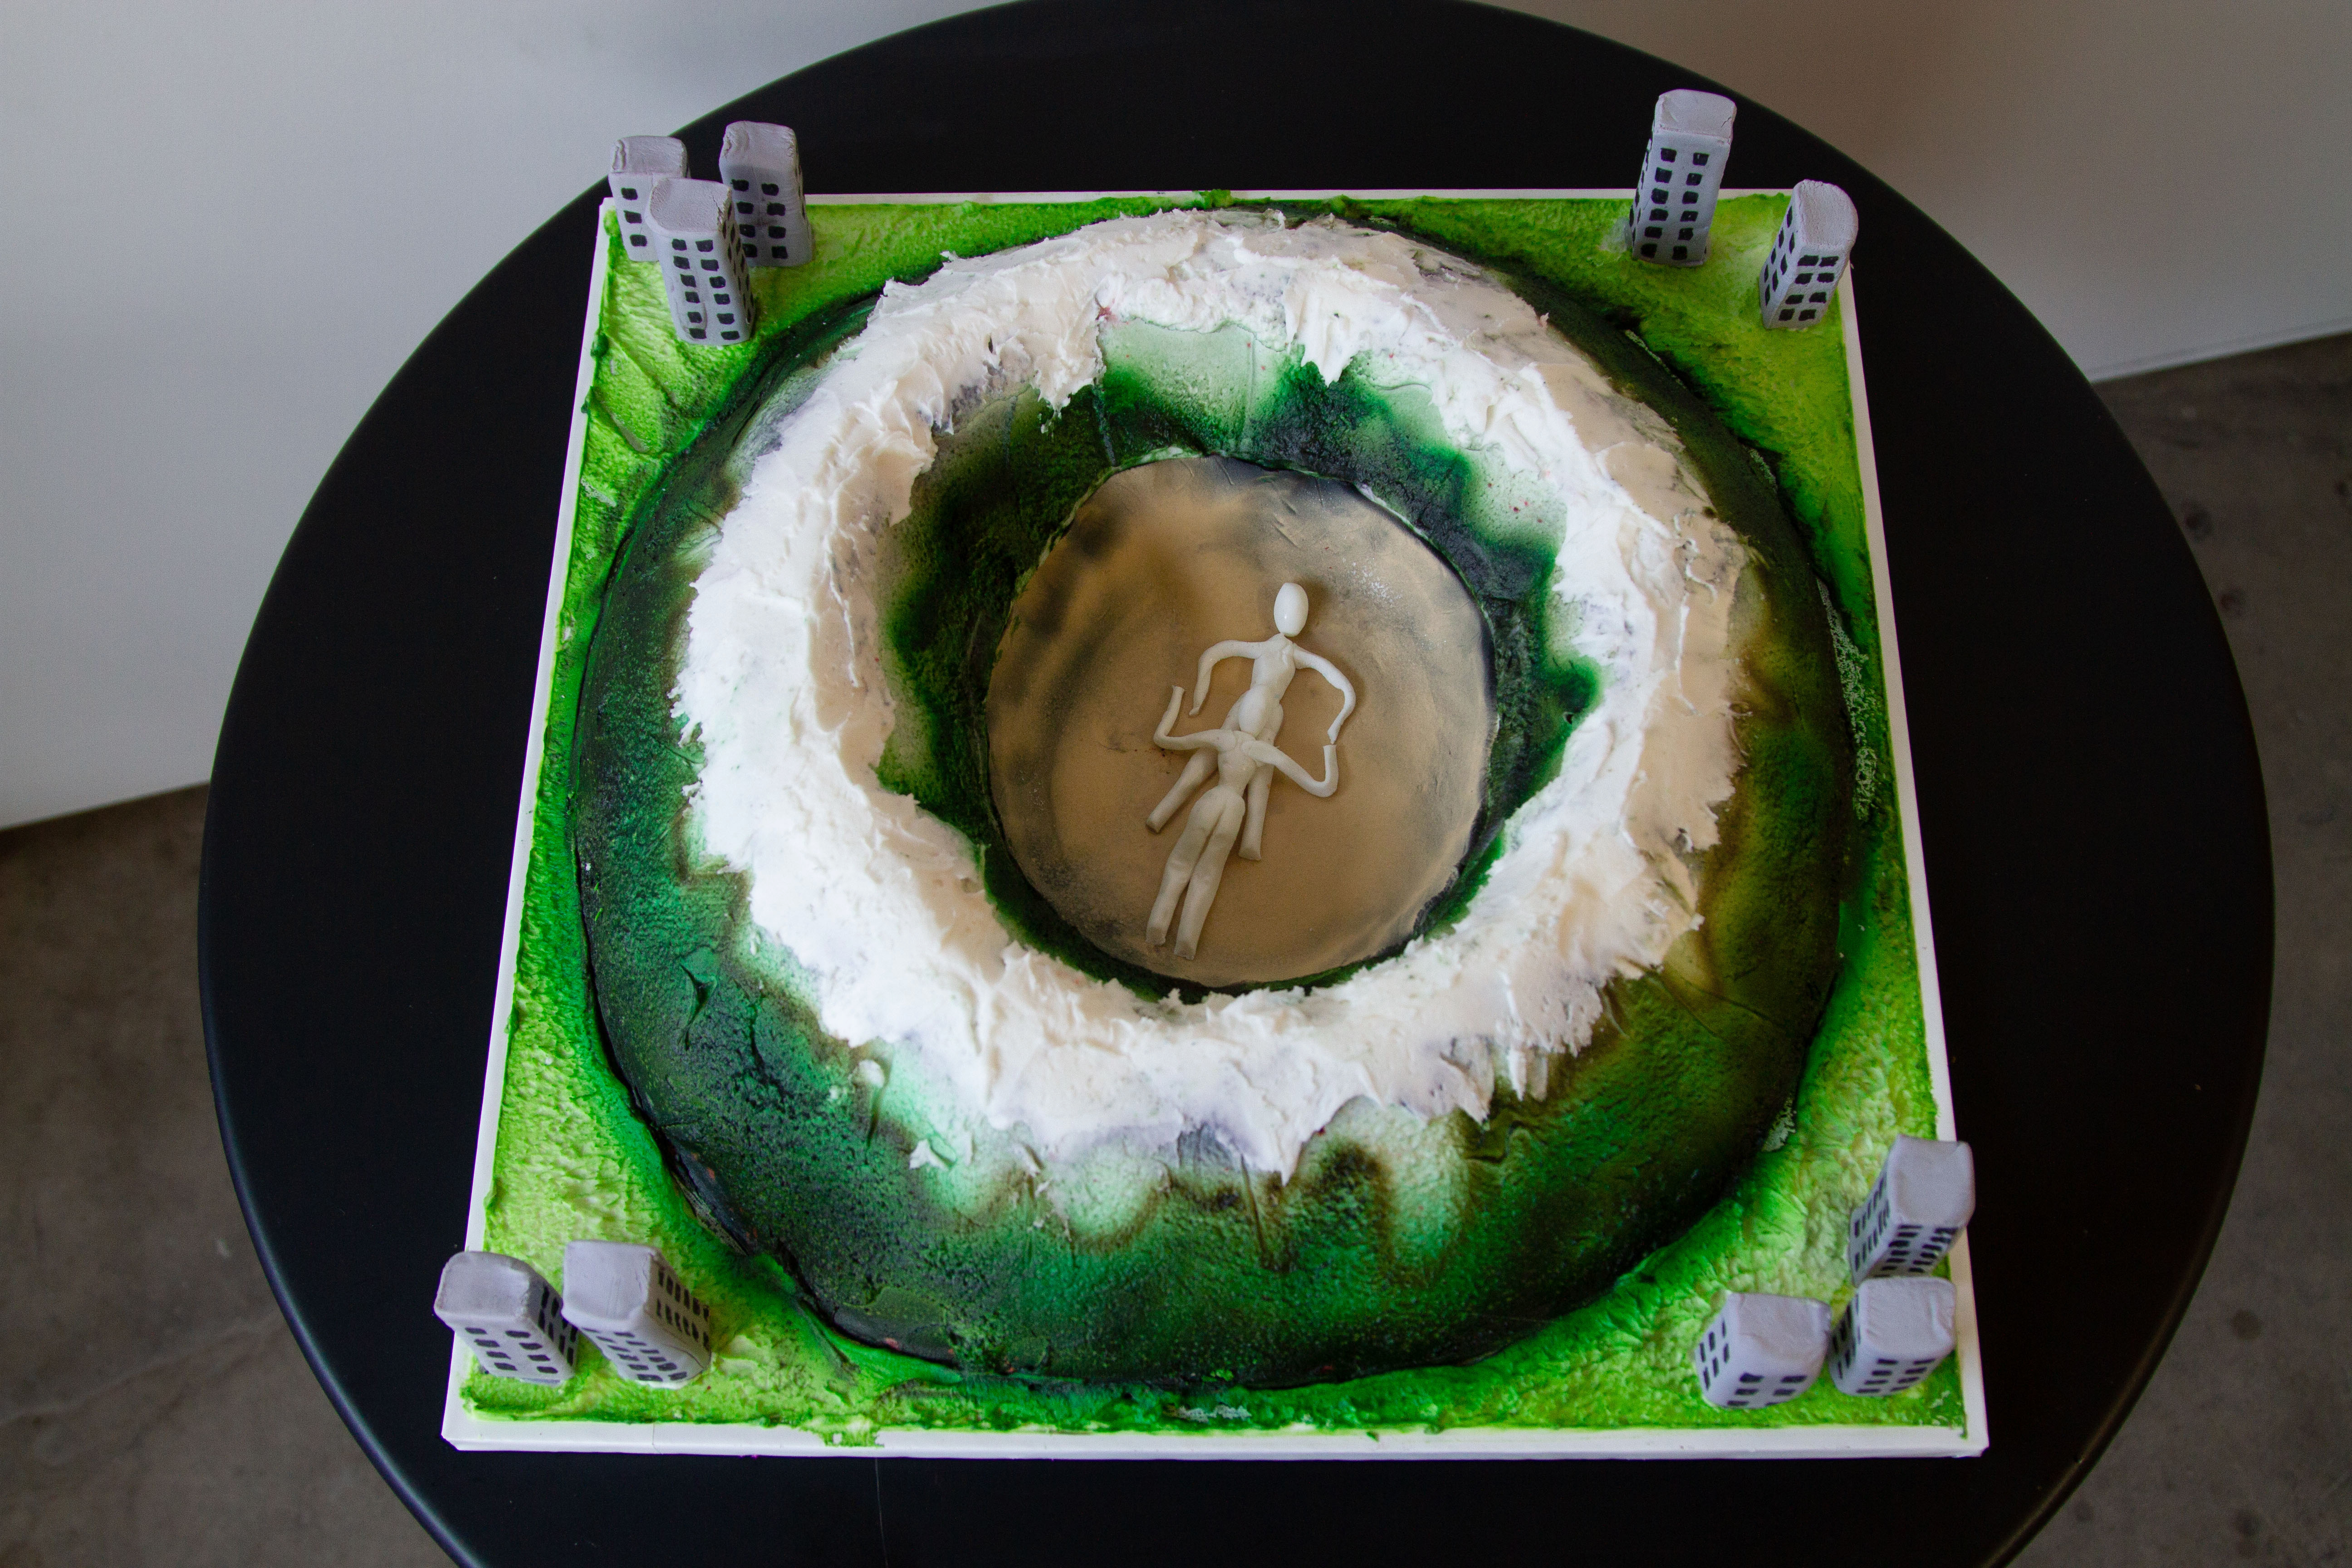 Ariel 3/4 view of a cake shaped like a mountainous crater with two figures engaged in felatio in the center surrounded by buildings on a black table